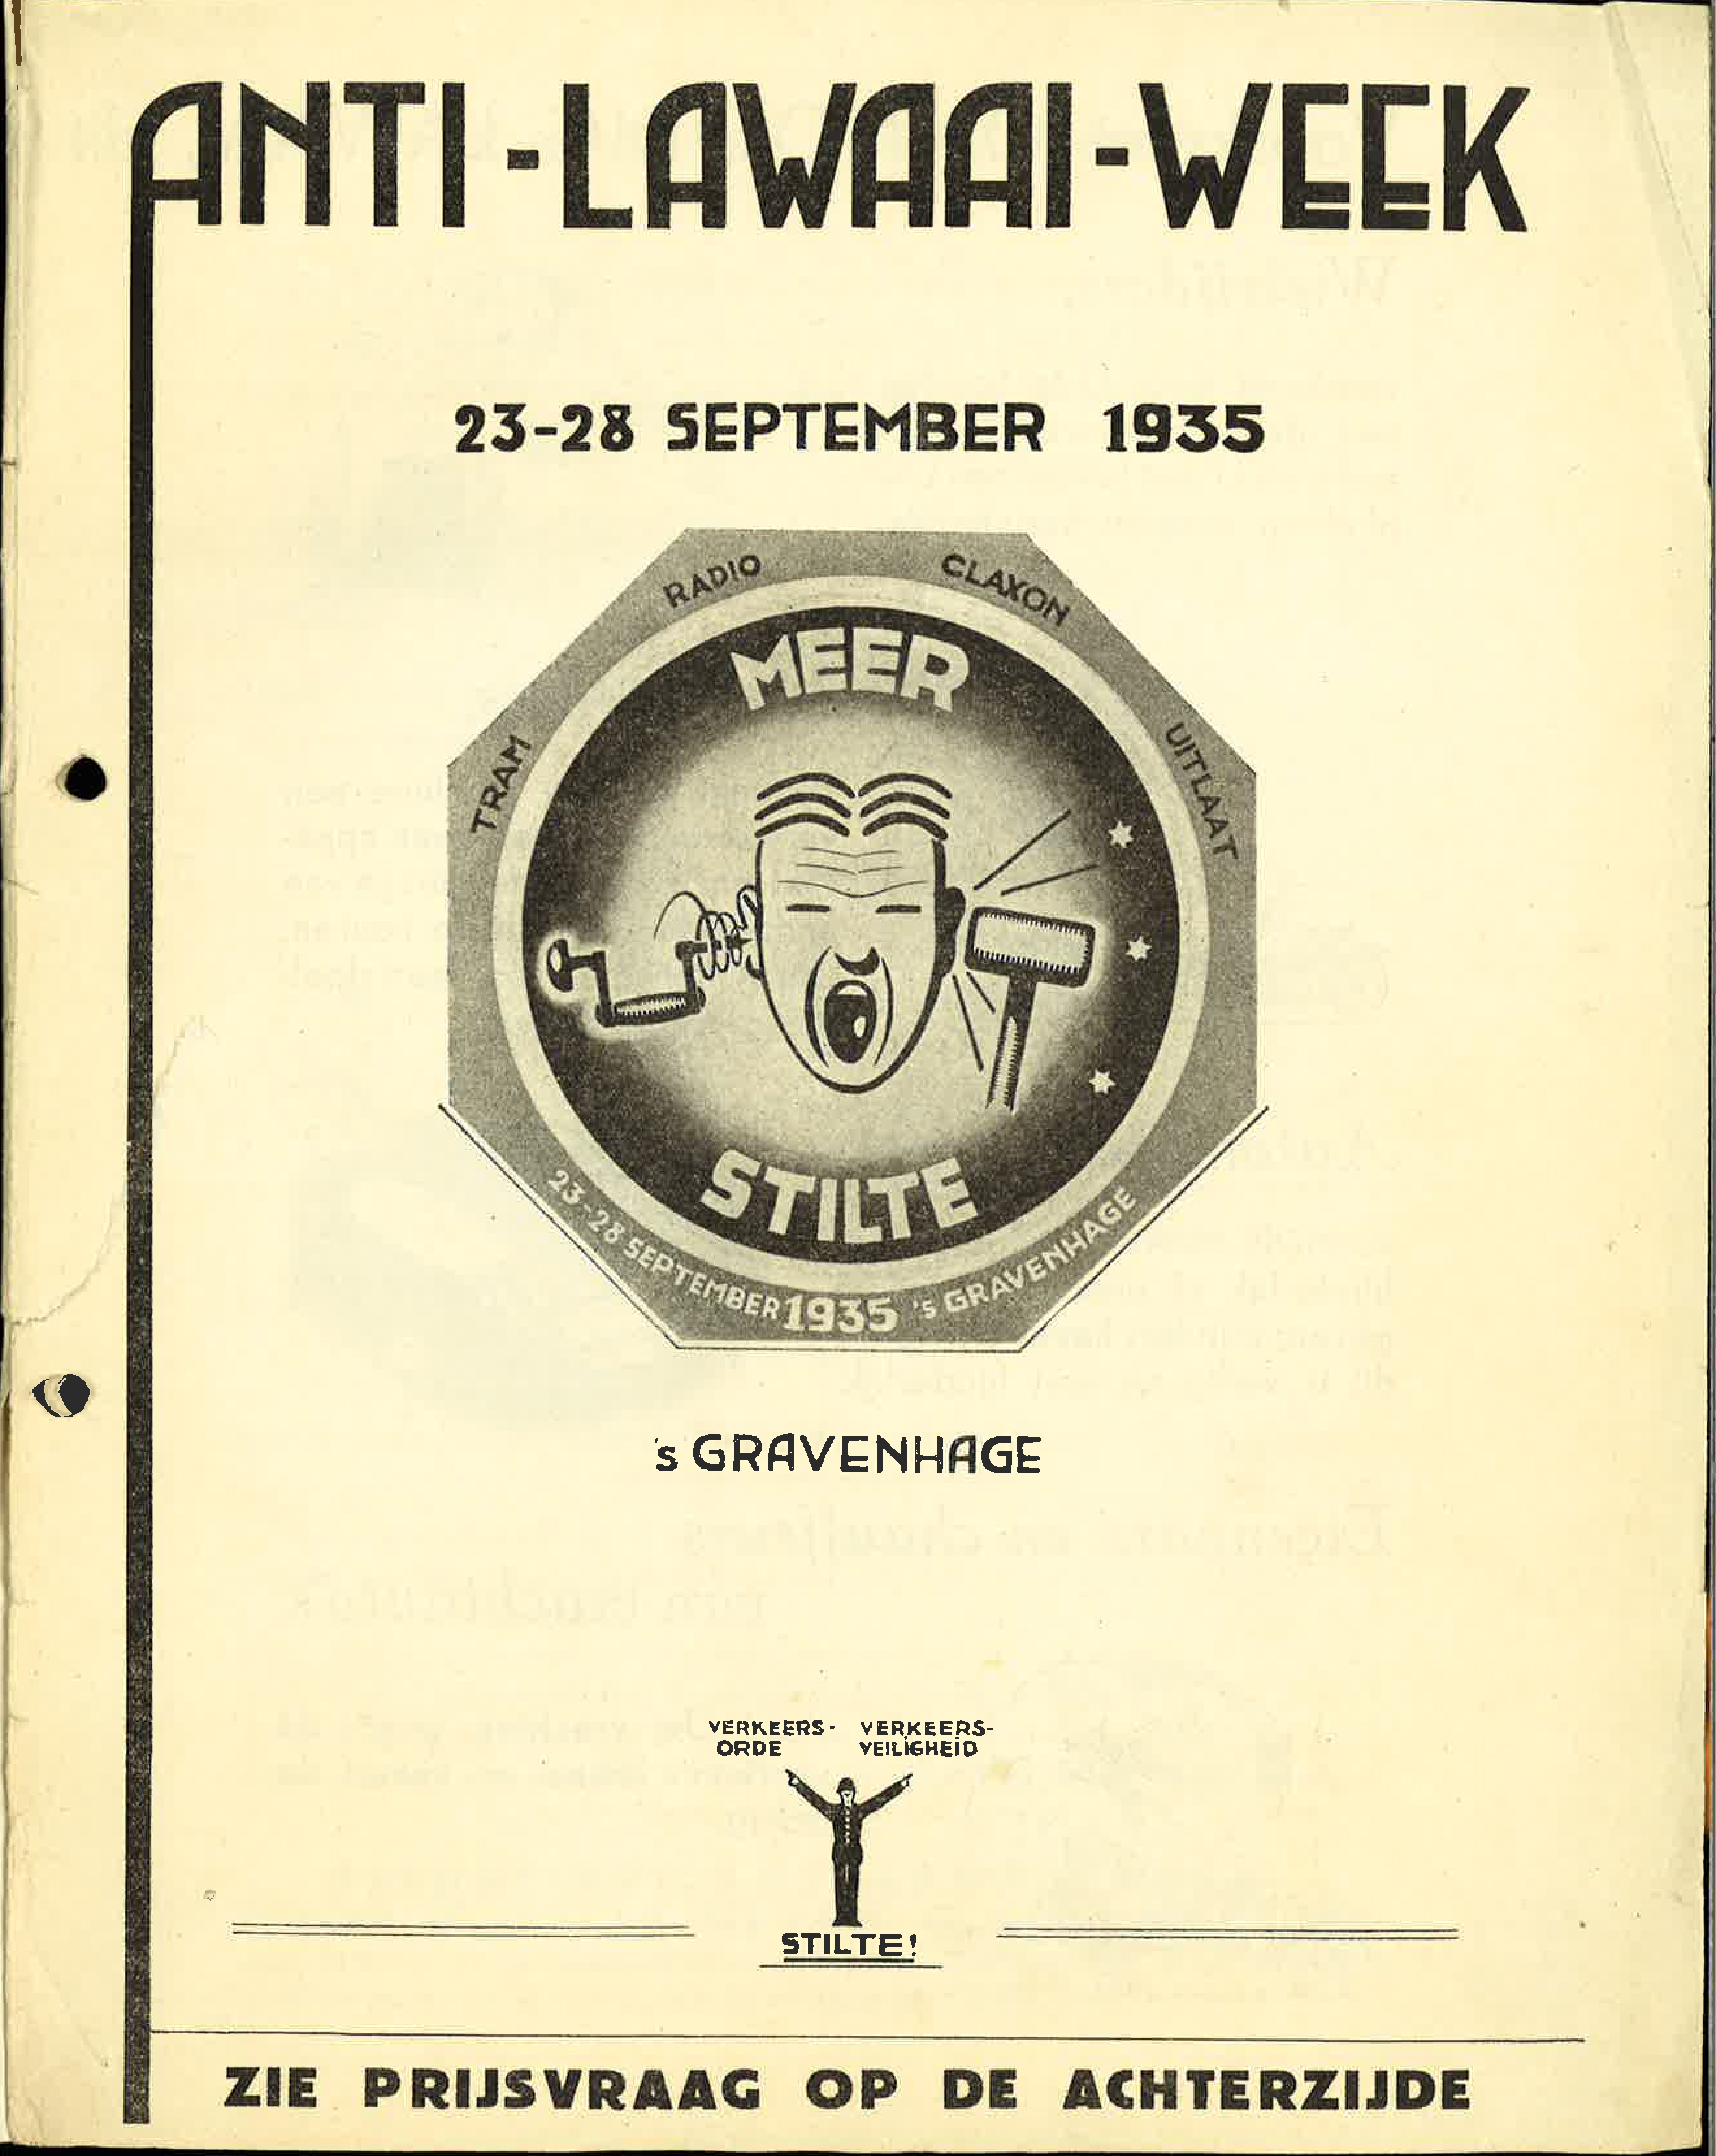 Figure 1: Leaflet "Anti-Noise Week", September 23-28, 1935, The Hague (The Netherlands). From Archives Sound Foundation (Geluidstichting), stored at the archives of the Dutch Acoustical Society (Nederlands Akoestisch Genootschap), Nieuwegein, The Netherlands. Courtesy Nederlands Akoestisch Genootschap.